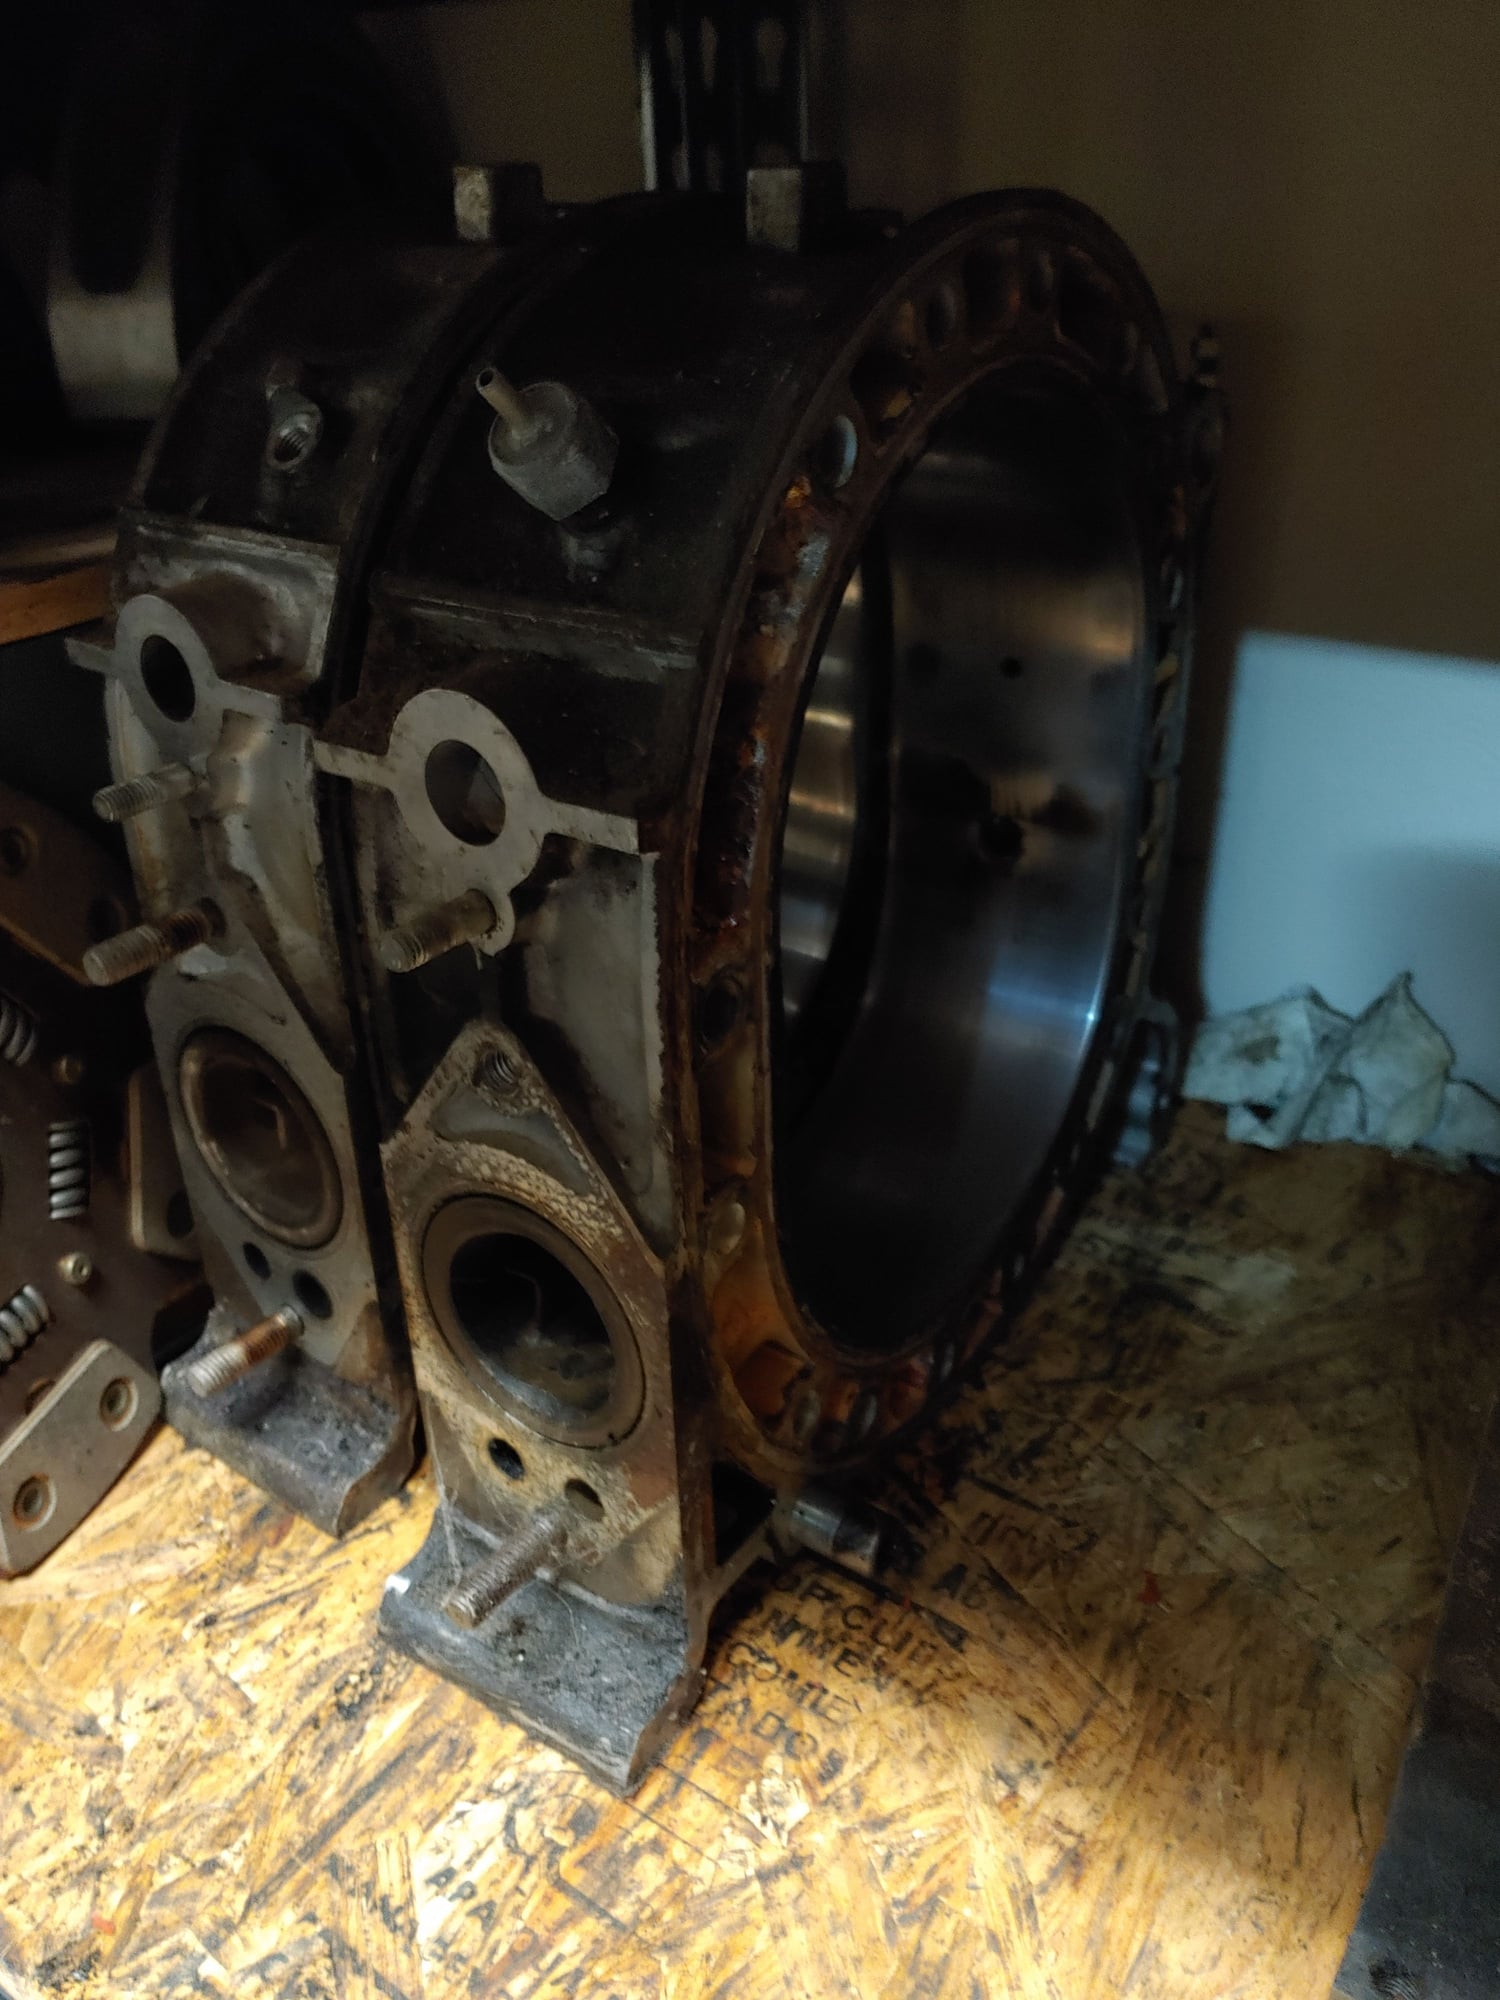 Engine - Internals - 86-91 Rotor housings - Used - 1986 to 1991 Mazda RX-7 - Dallas, TX 75089, United States